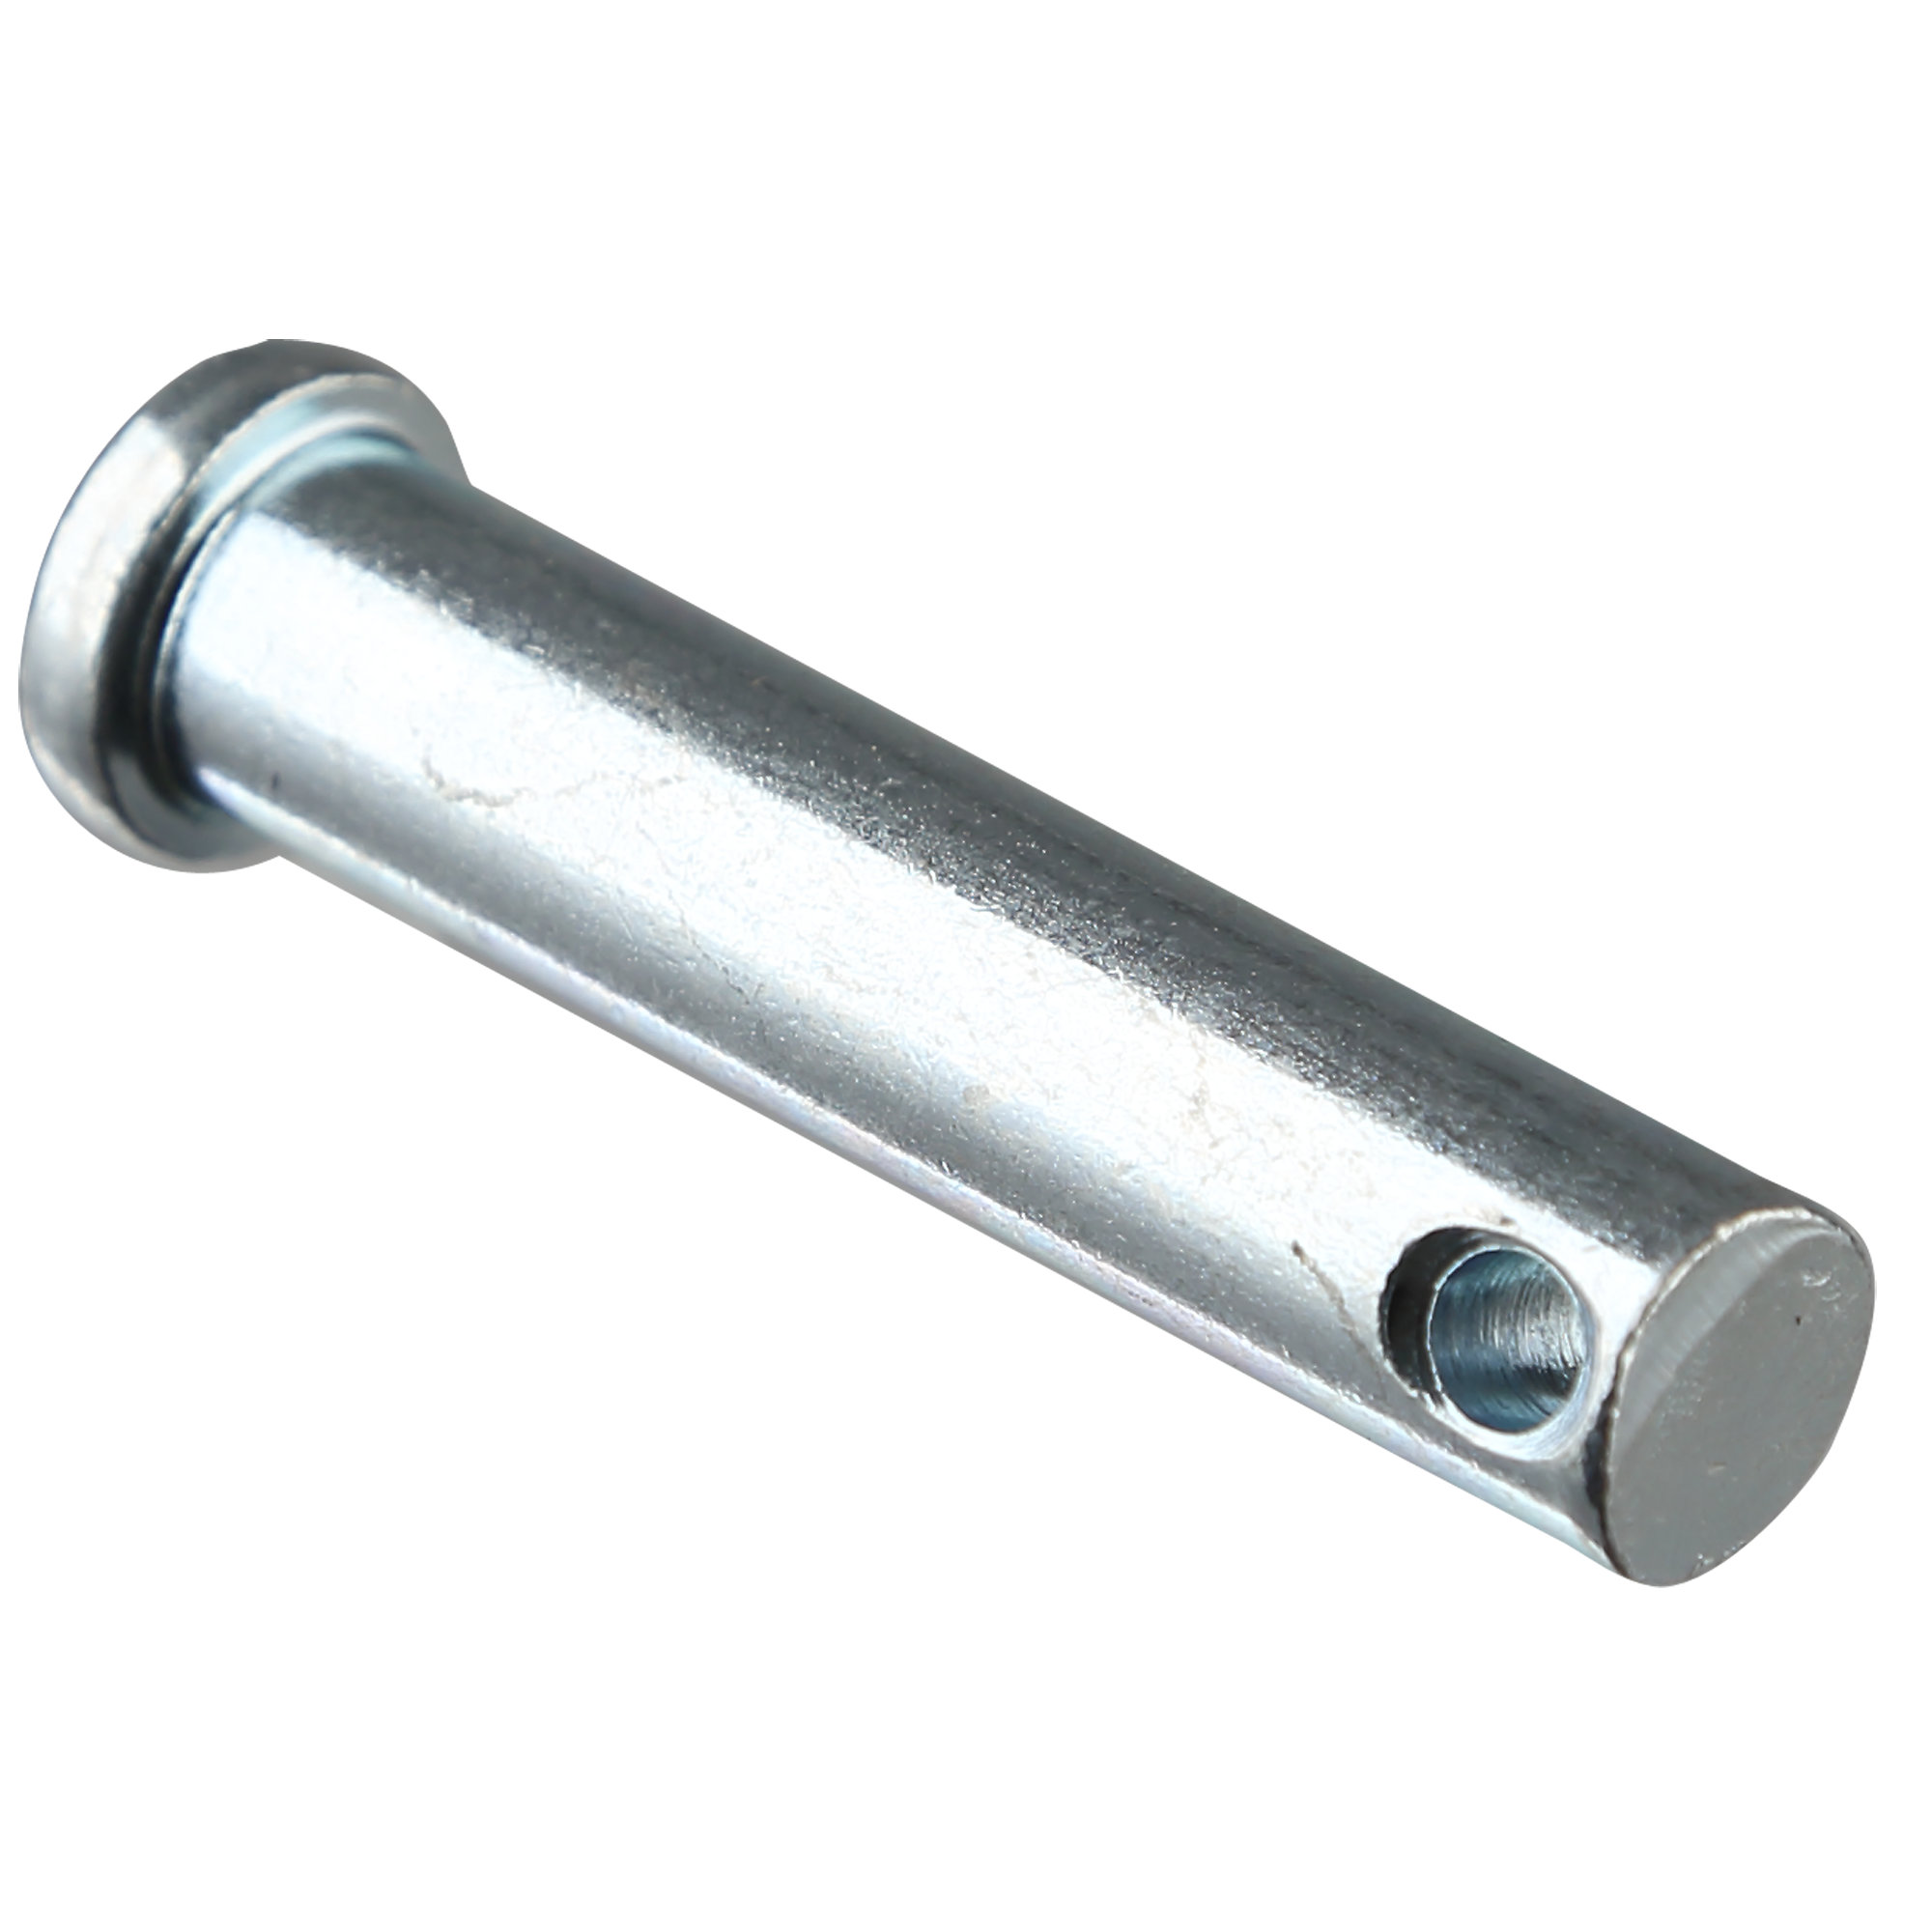 Pin,Clevis, 3/8 X 1.75, Silver